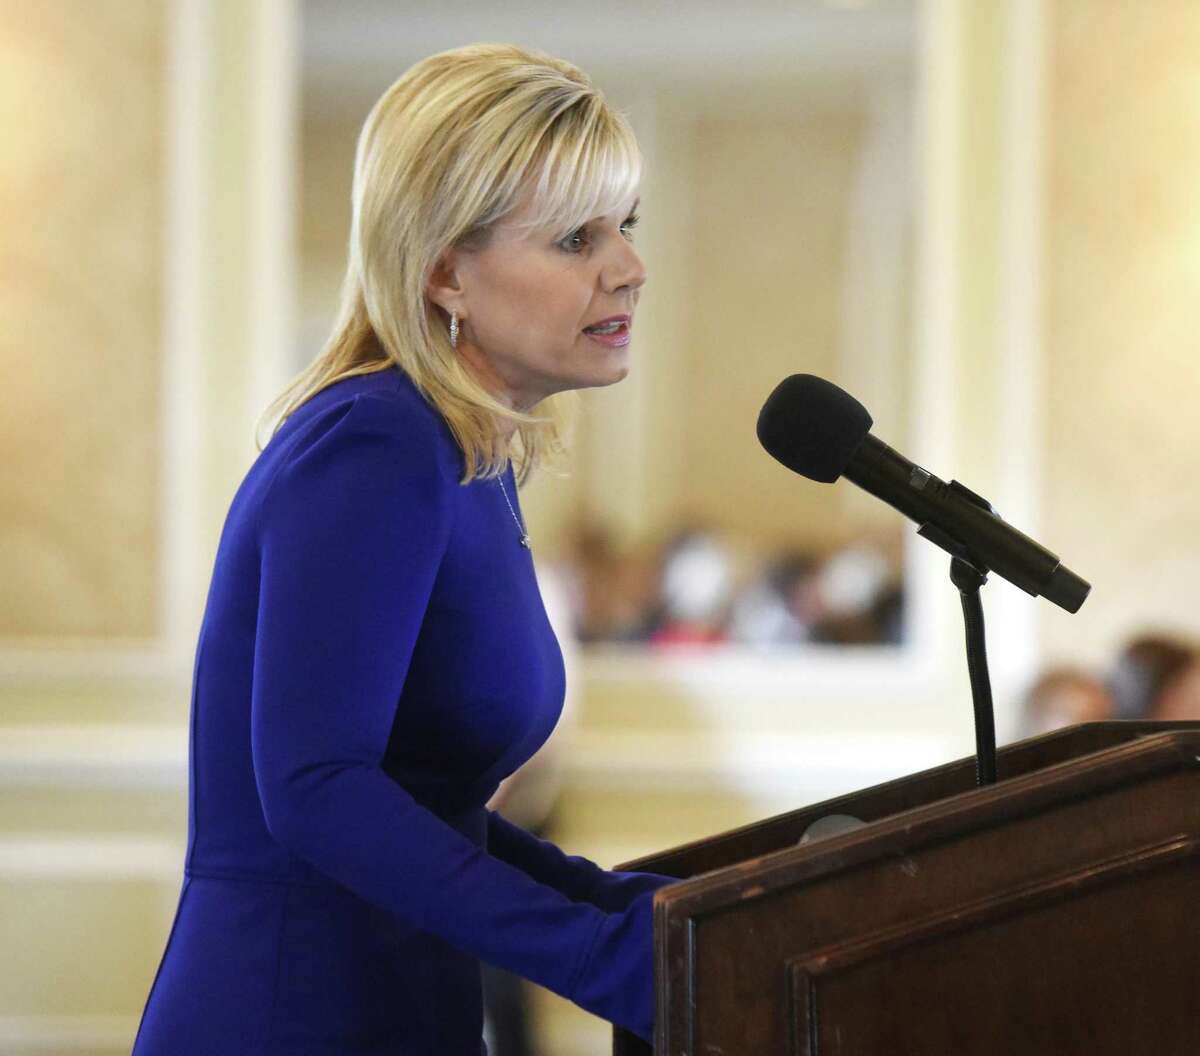 Author and former news anchor Gretchen Carlson speaks at the Greenwich Chamber of Commerce Women Who Matter Luncheon at Greenwich Country Club in Greenwich, Conn. Thursday, Nov. 16, 2017. Carlson spoke about her life and experiences with sexual harassment while promoting her new book "Be Fierce: Stop Harassment and Take Your Power Back."